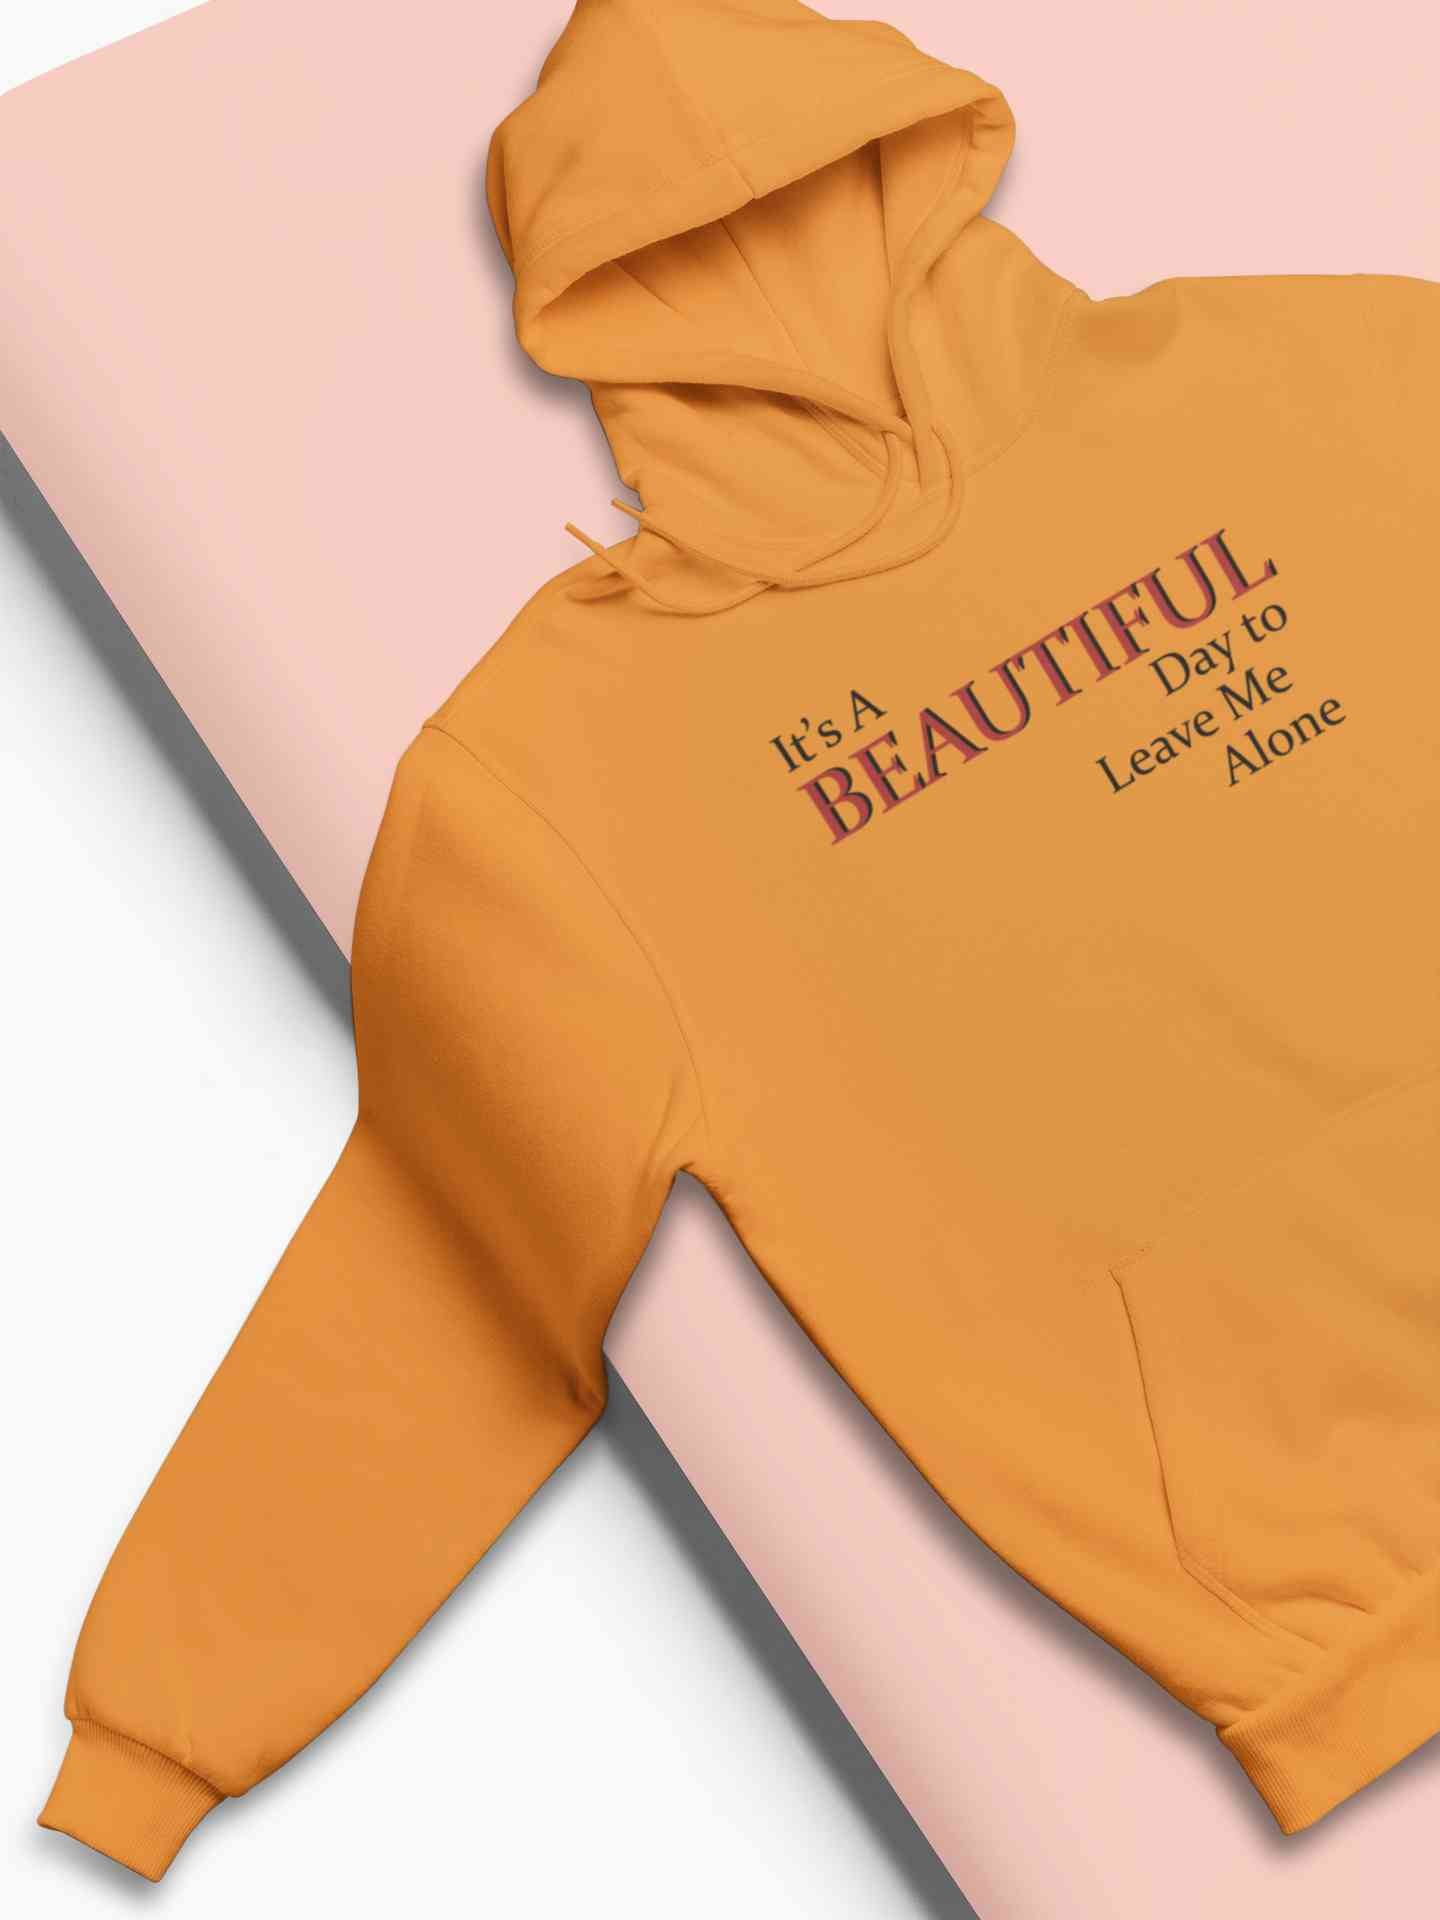 It Is A Beautiful Day To Leave Me Alone Hoodies for Women-FunkyTeesClub